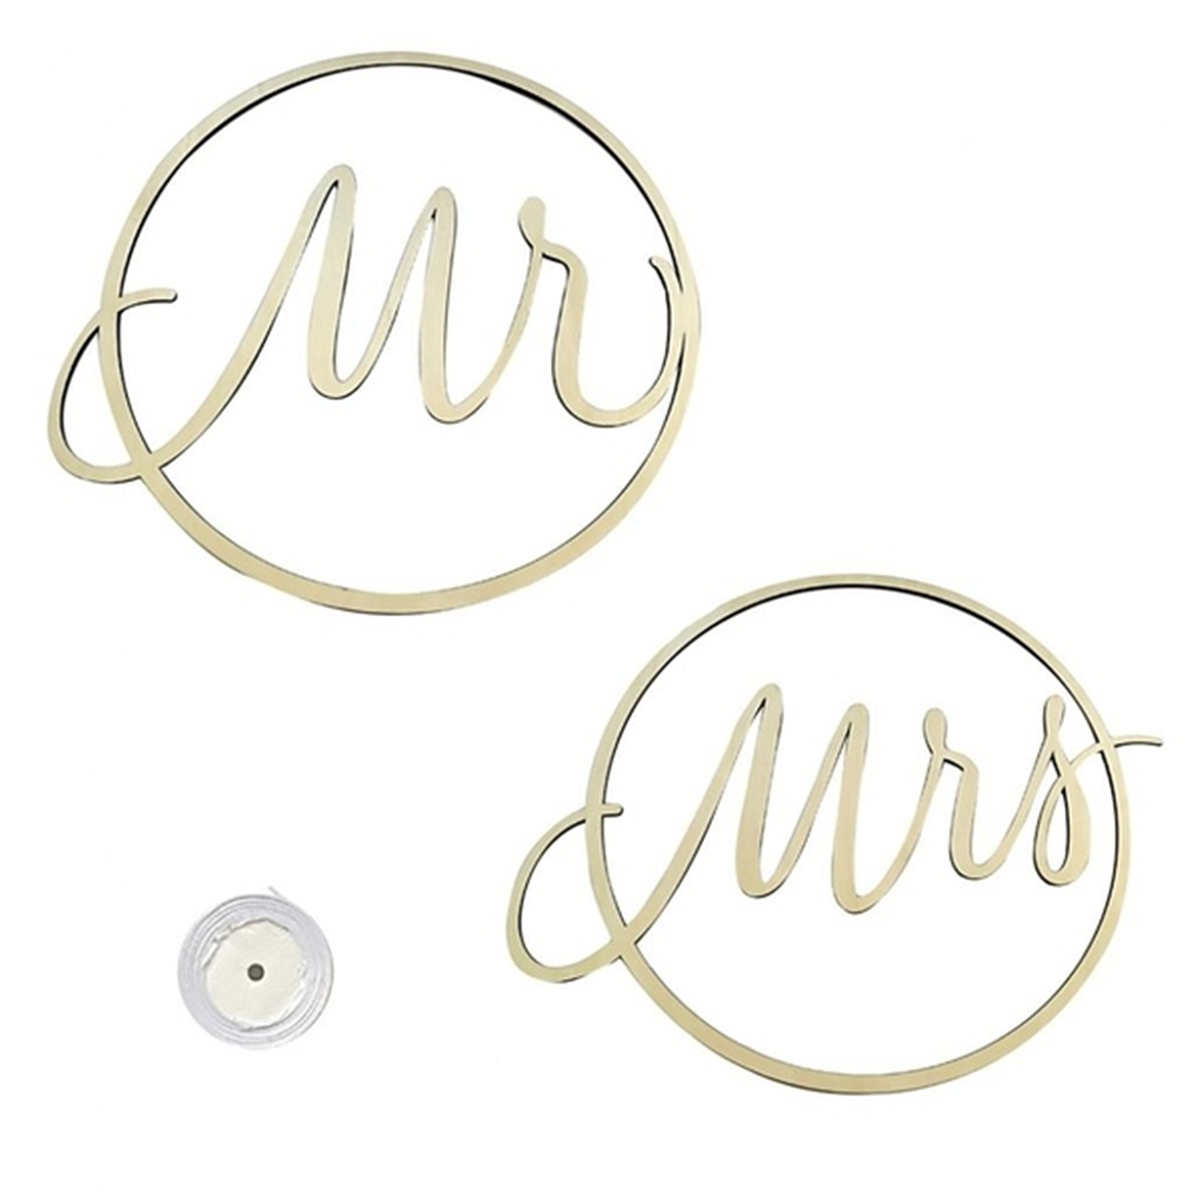 Mr-amp-Mrs-Wedding-Chair-Signs-Floral-HoopCalligraphy-Wooden-Hanging-Circle-Set-Decor-Supplies-1445385